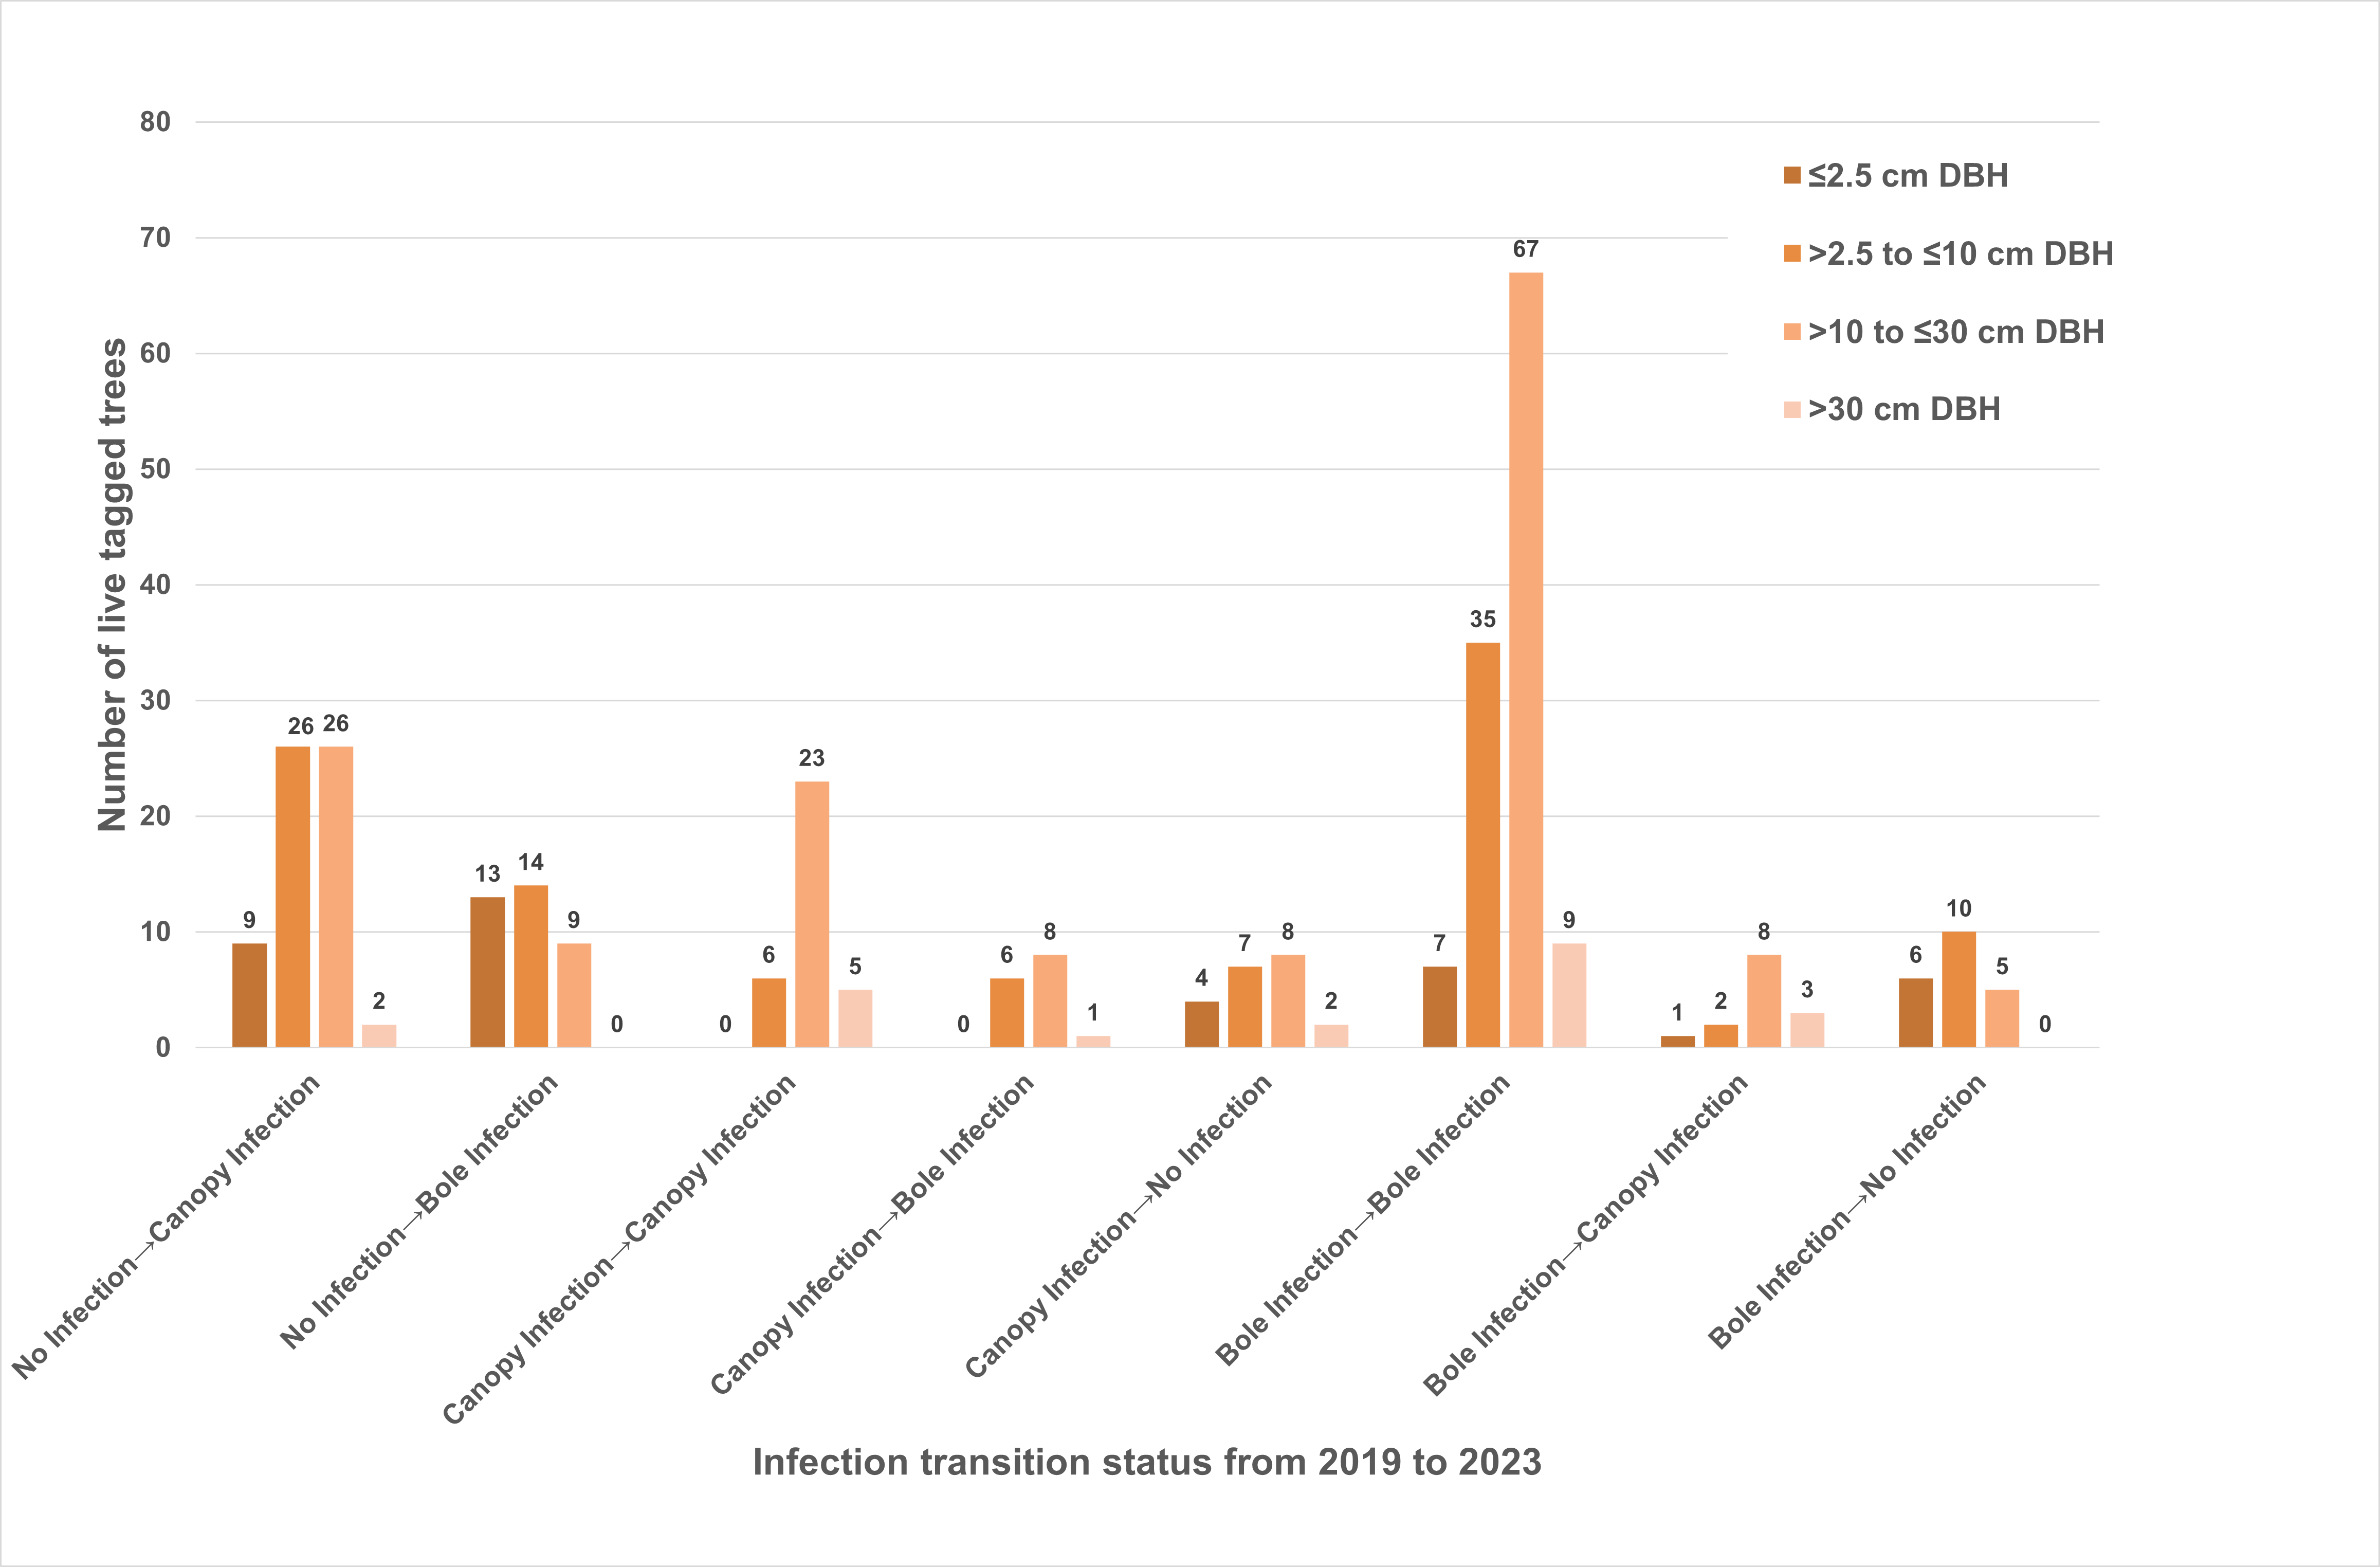 Graph of infection transition status for whitebark pine between 2019 and 2023, showing that most trees either went from no infection to a canopy infection, or retained bole infections over time.